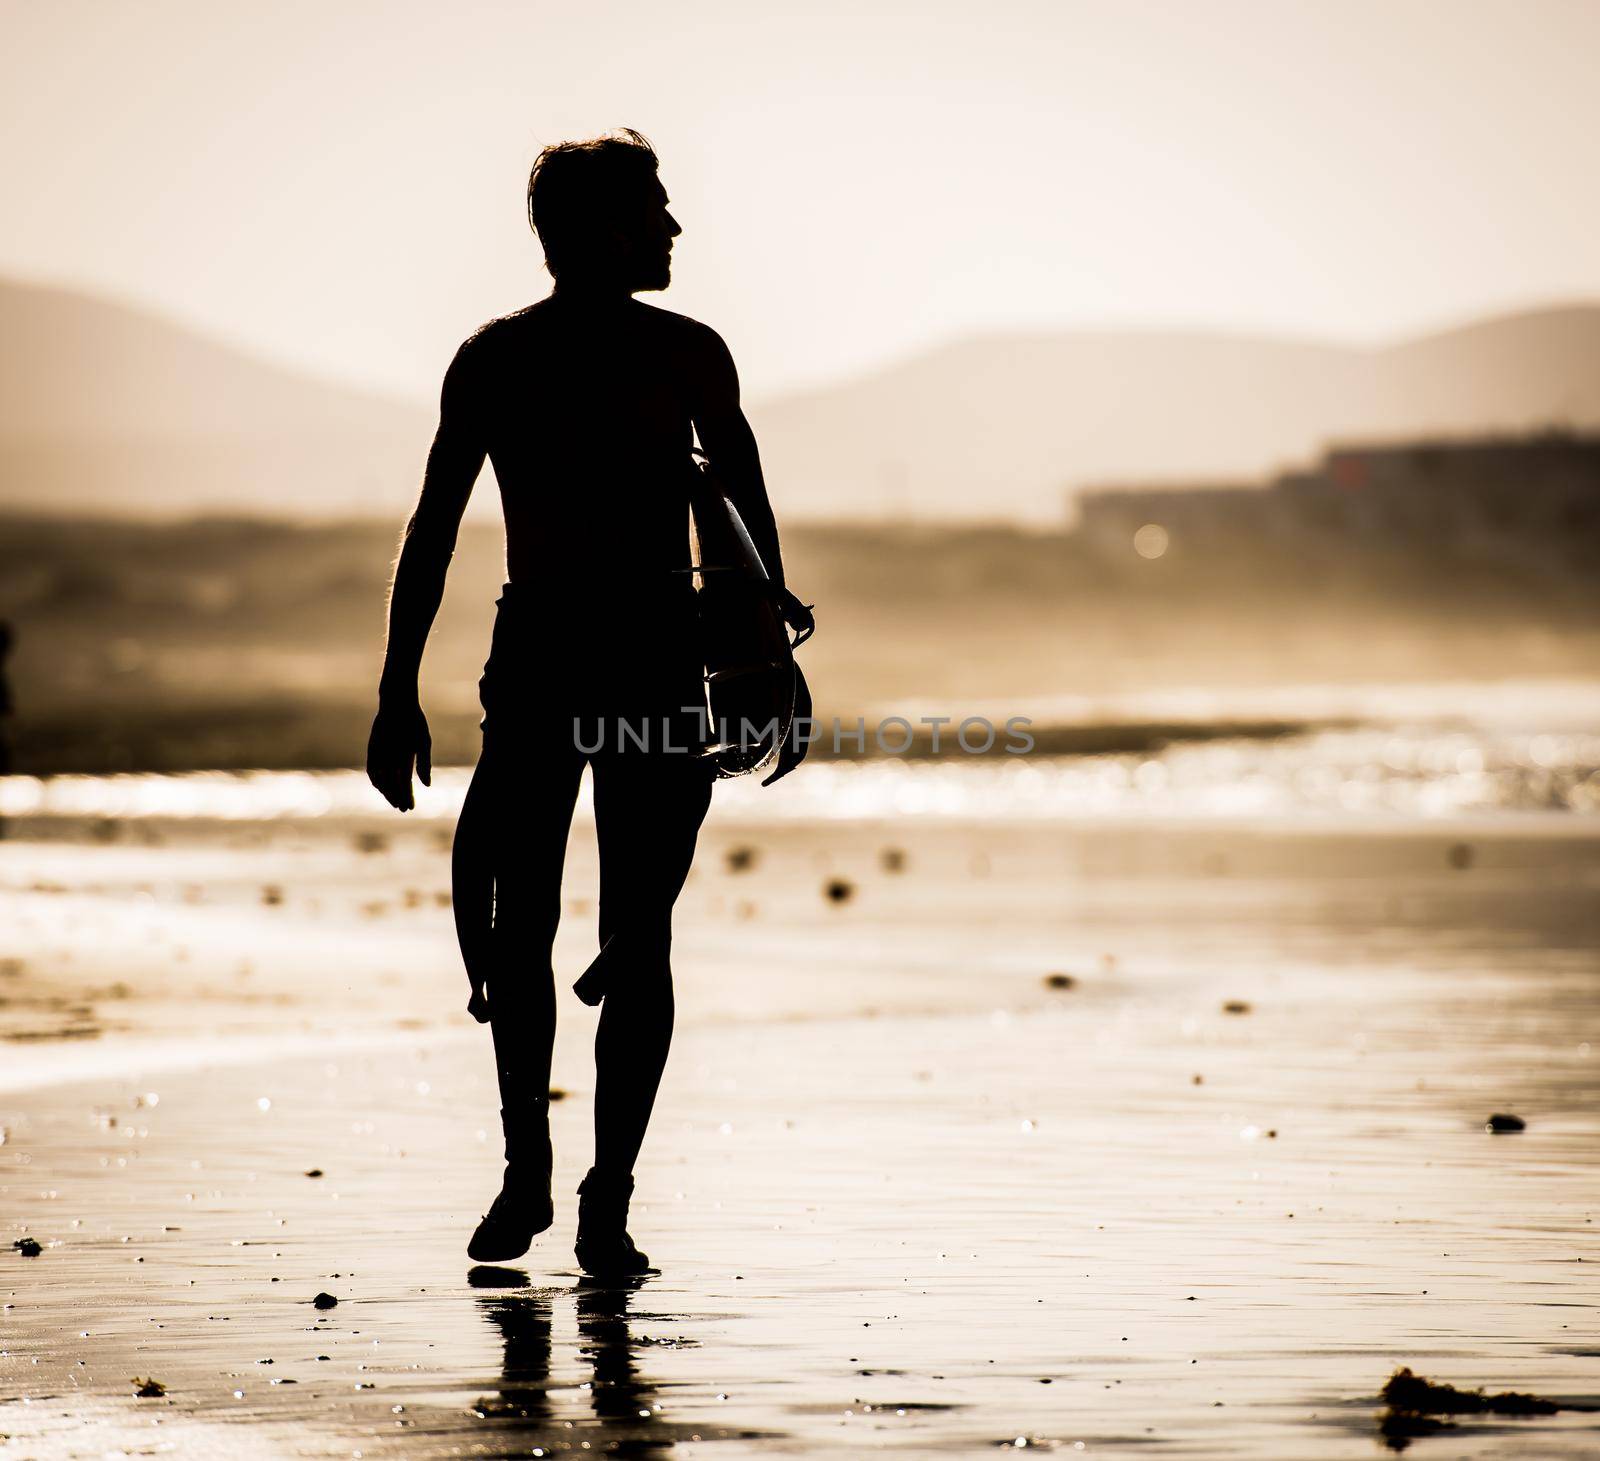 Silhouette of the man walking on the beach with the surfboard